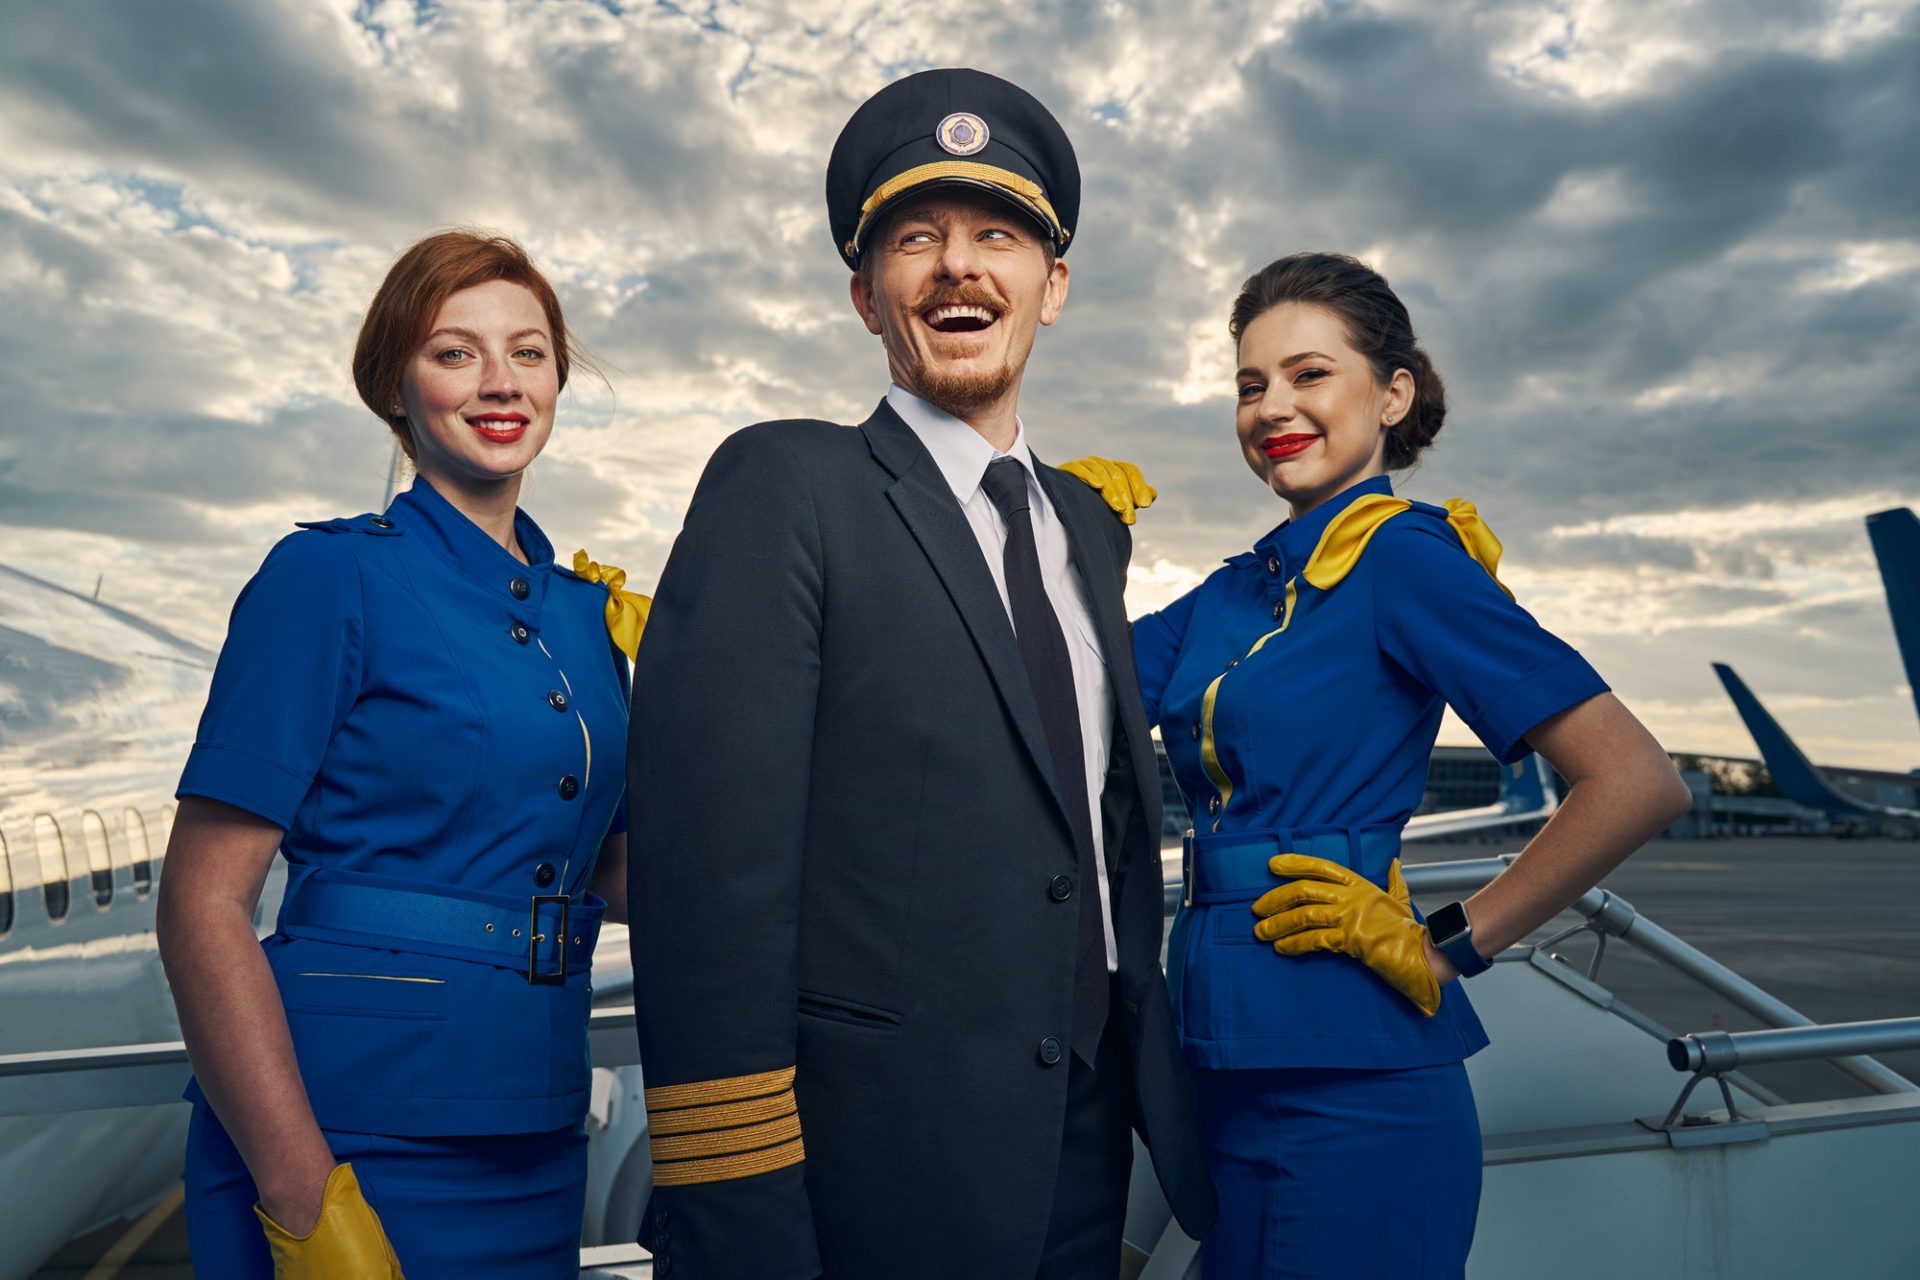 cheerful-aviator-and-flight-attendants-standing-on-the-boarding-stairs-e1630639237397.jpg